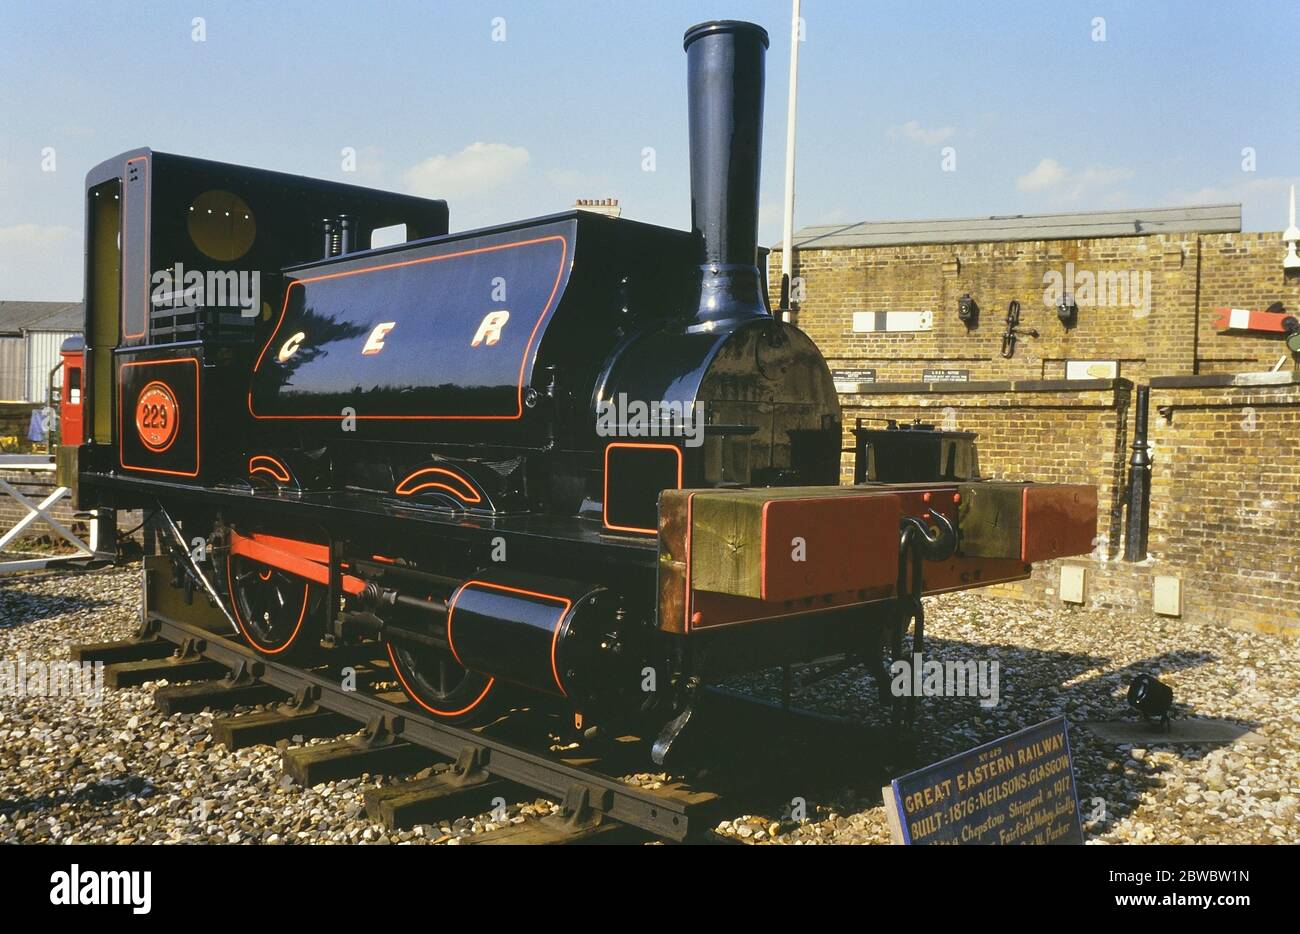 Steam locomotive, GER no. 229on, Coffee Pot, display at The former North Woolwich Old Station Museum, London, England, UK. Circa 1980's Stock Photo